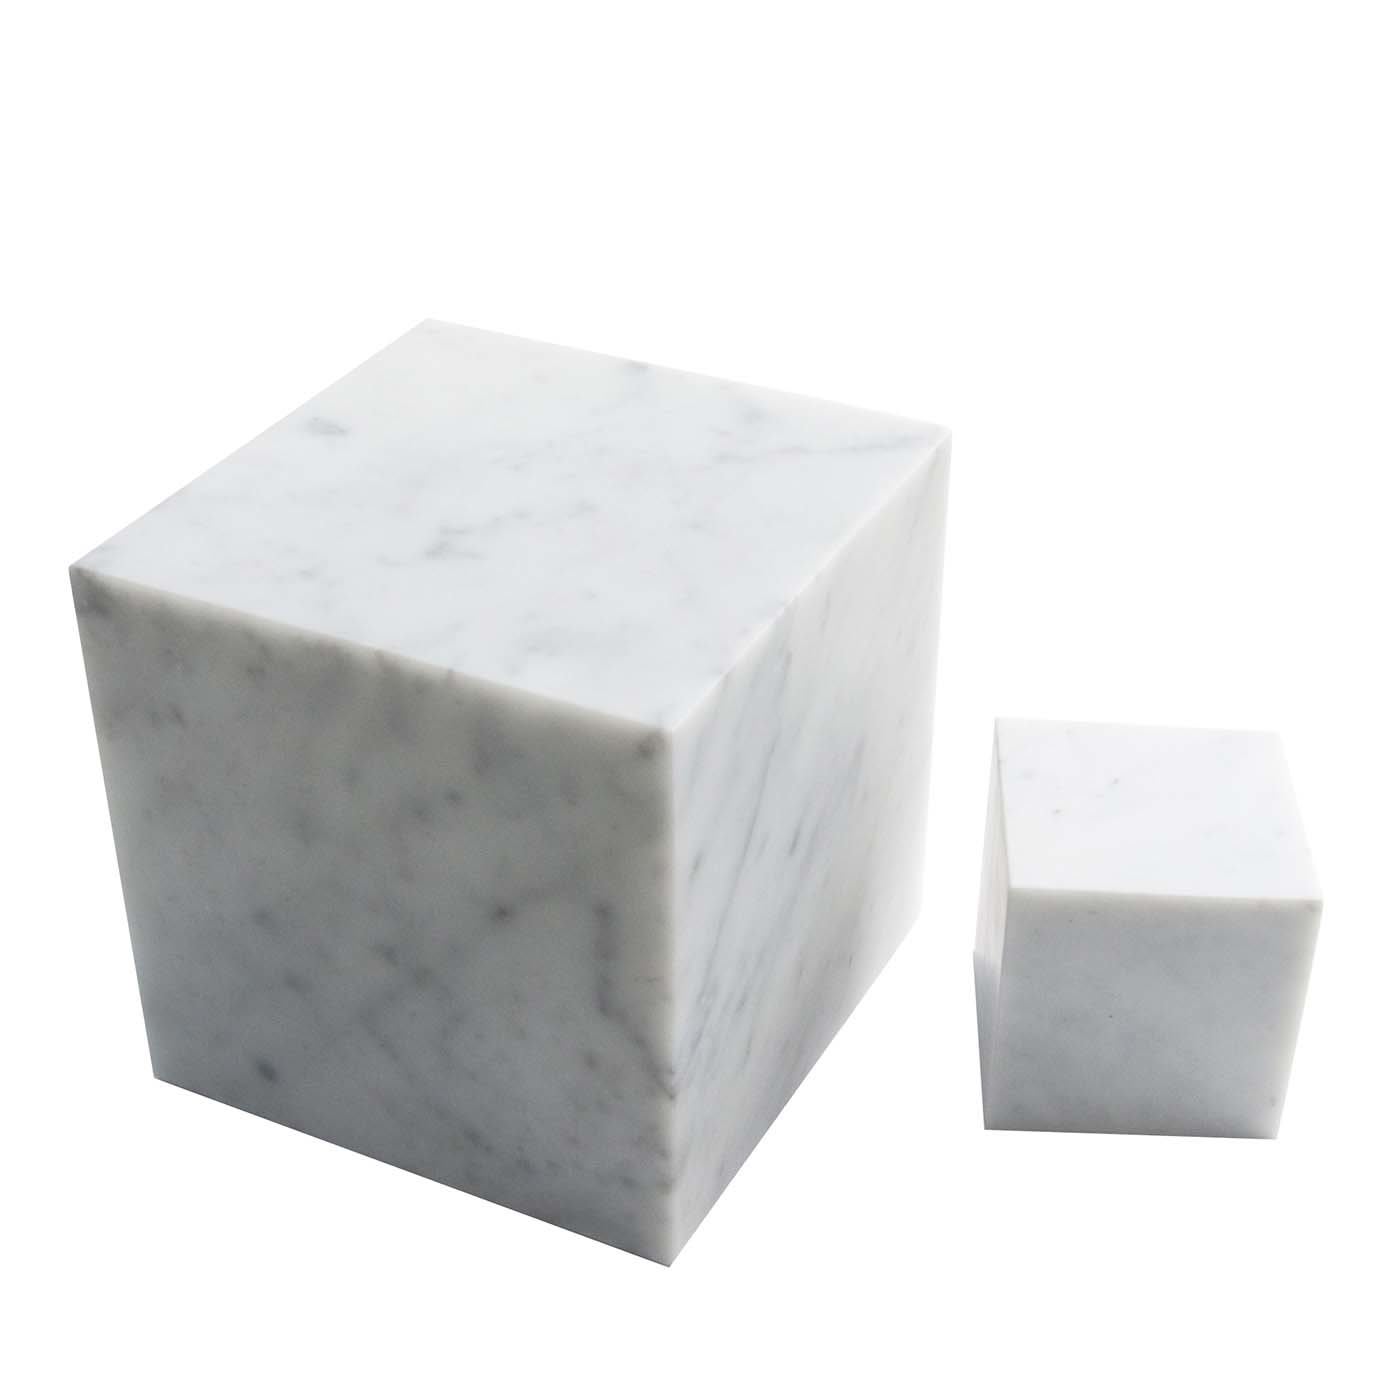 Set of Decorative Objects Paper Weight Book Holders in White Carrara Marble - FiammettaV Home Collection